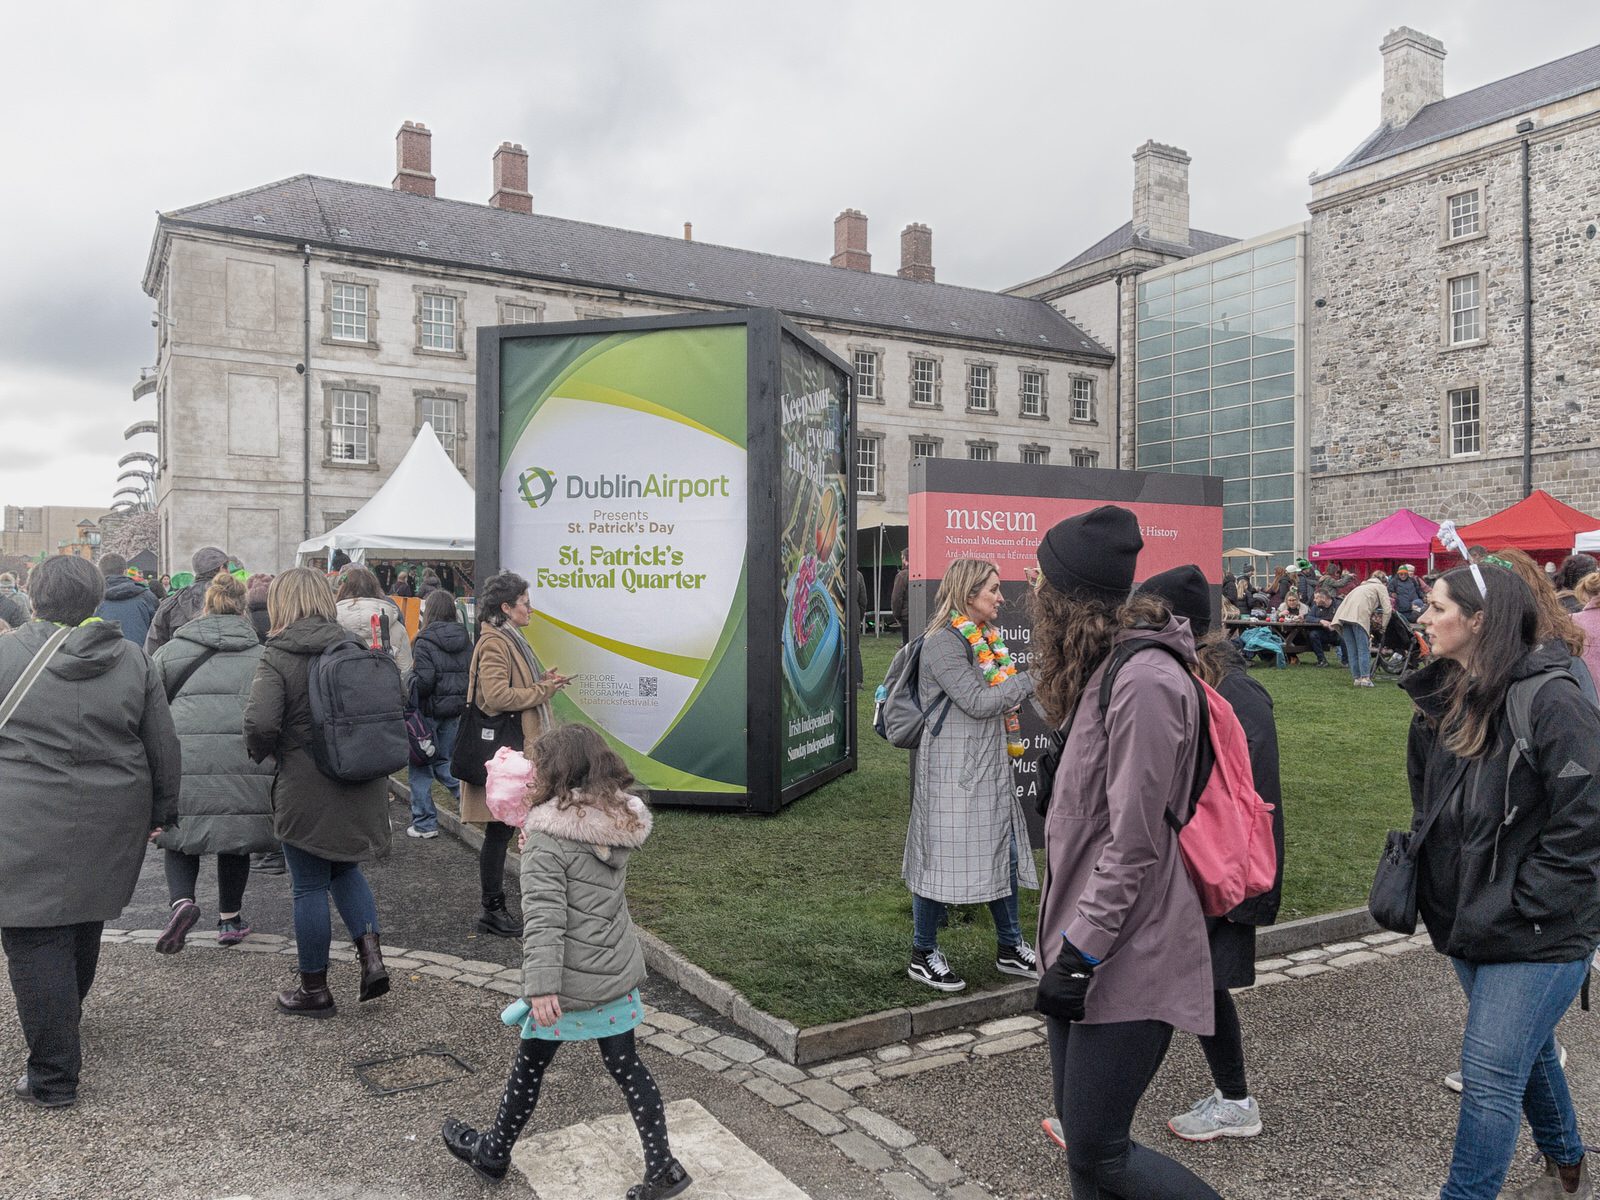 ST. PATRICK'S FESTIVAL QUARTER AT THE NATIONAL MUSEUM OF IRELAND 002